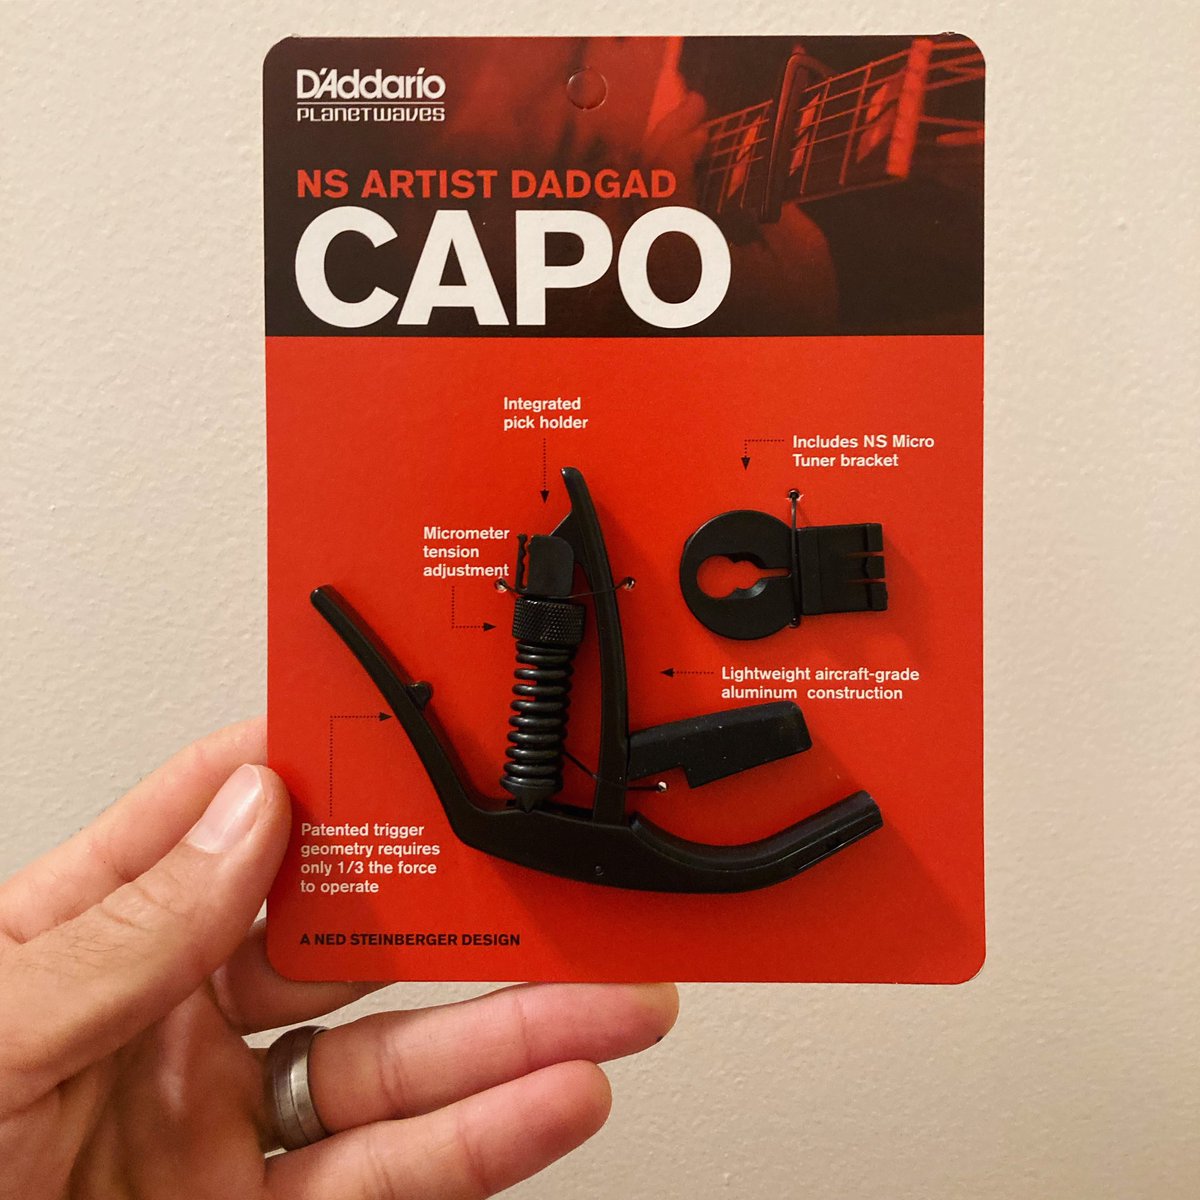 Found a new favorite capo via @DaddarioandCo.. Last week Jenny played for a small women’s event and learned how to play in a new tuning for the event (effectively DADGAD, except without having to retune because of this capo). https://t.co/lpF9ZBmNFN